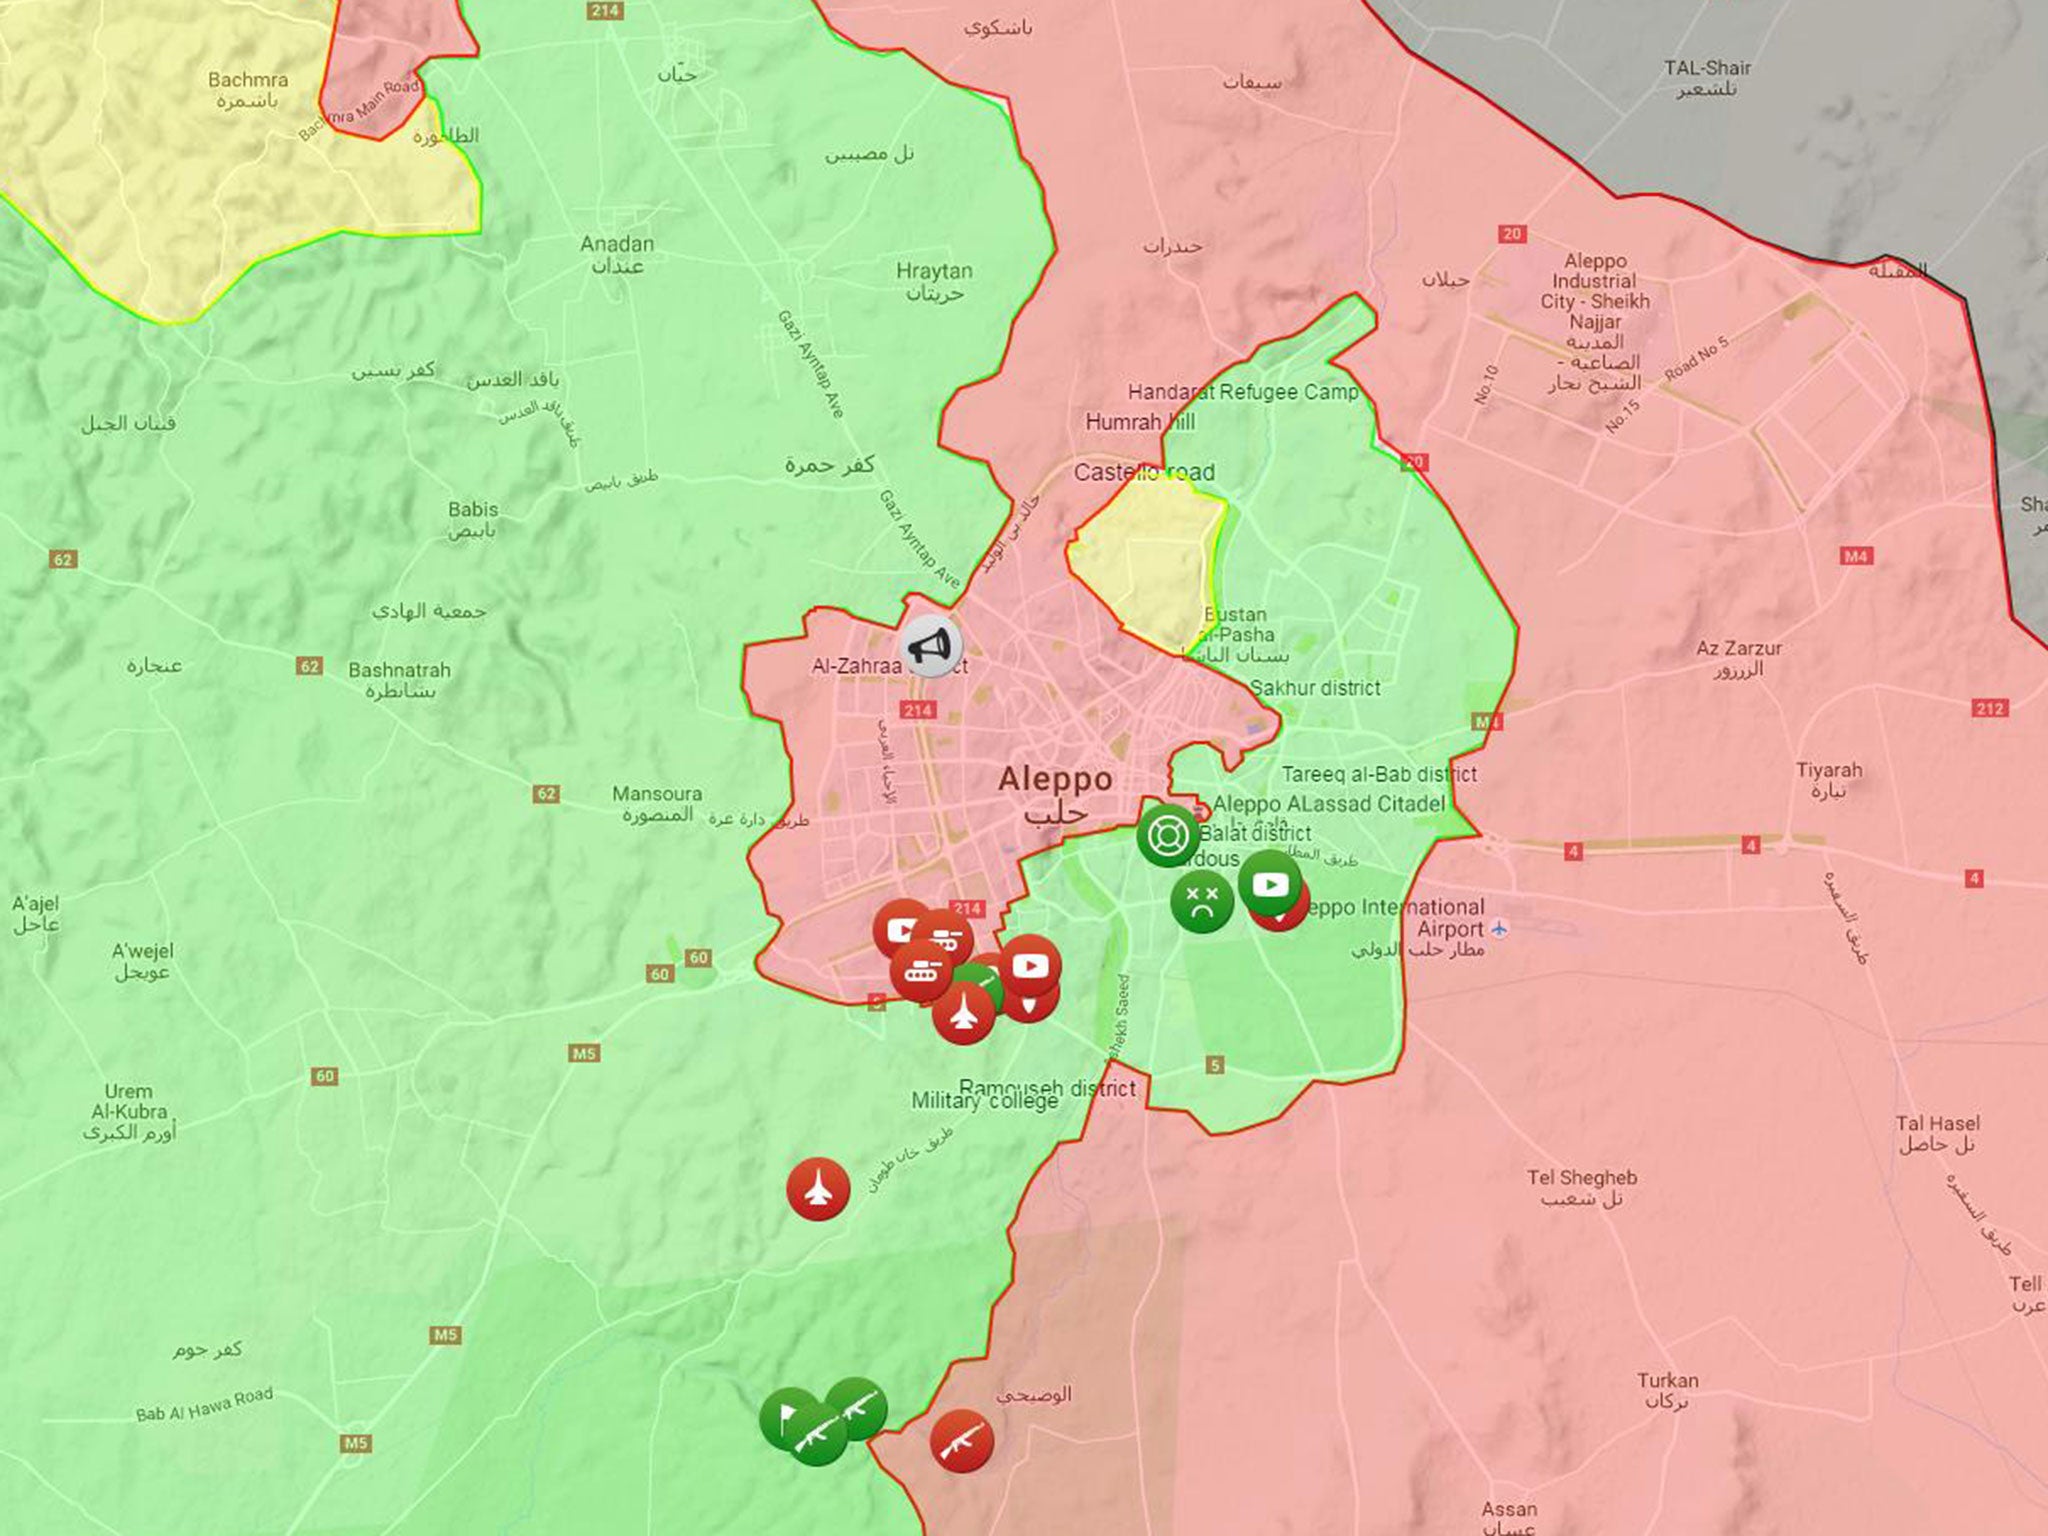 The situation in Aleppo on 18 August 2016, with rebel territory and attacks seen in green, regime in red and Kurdish in yellow